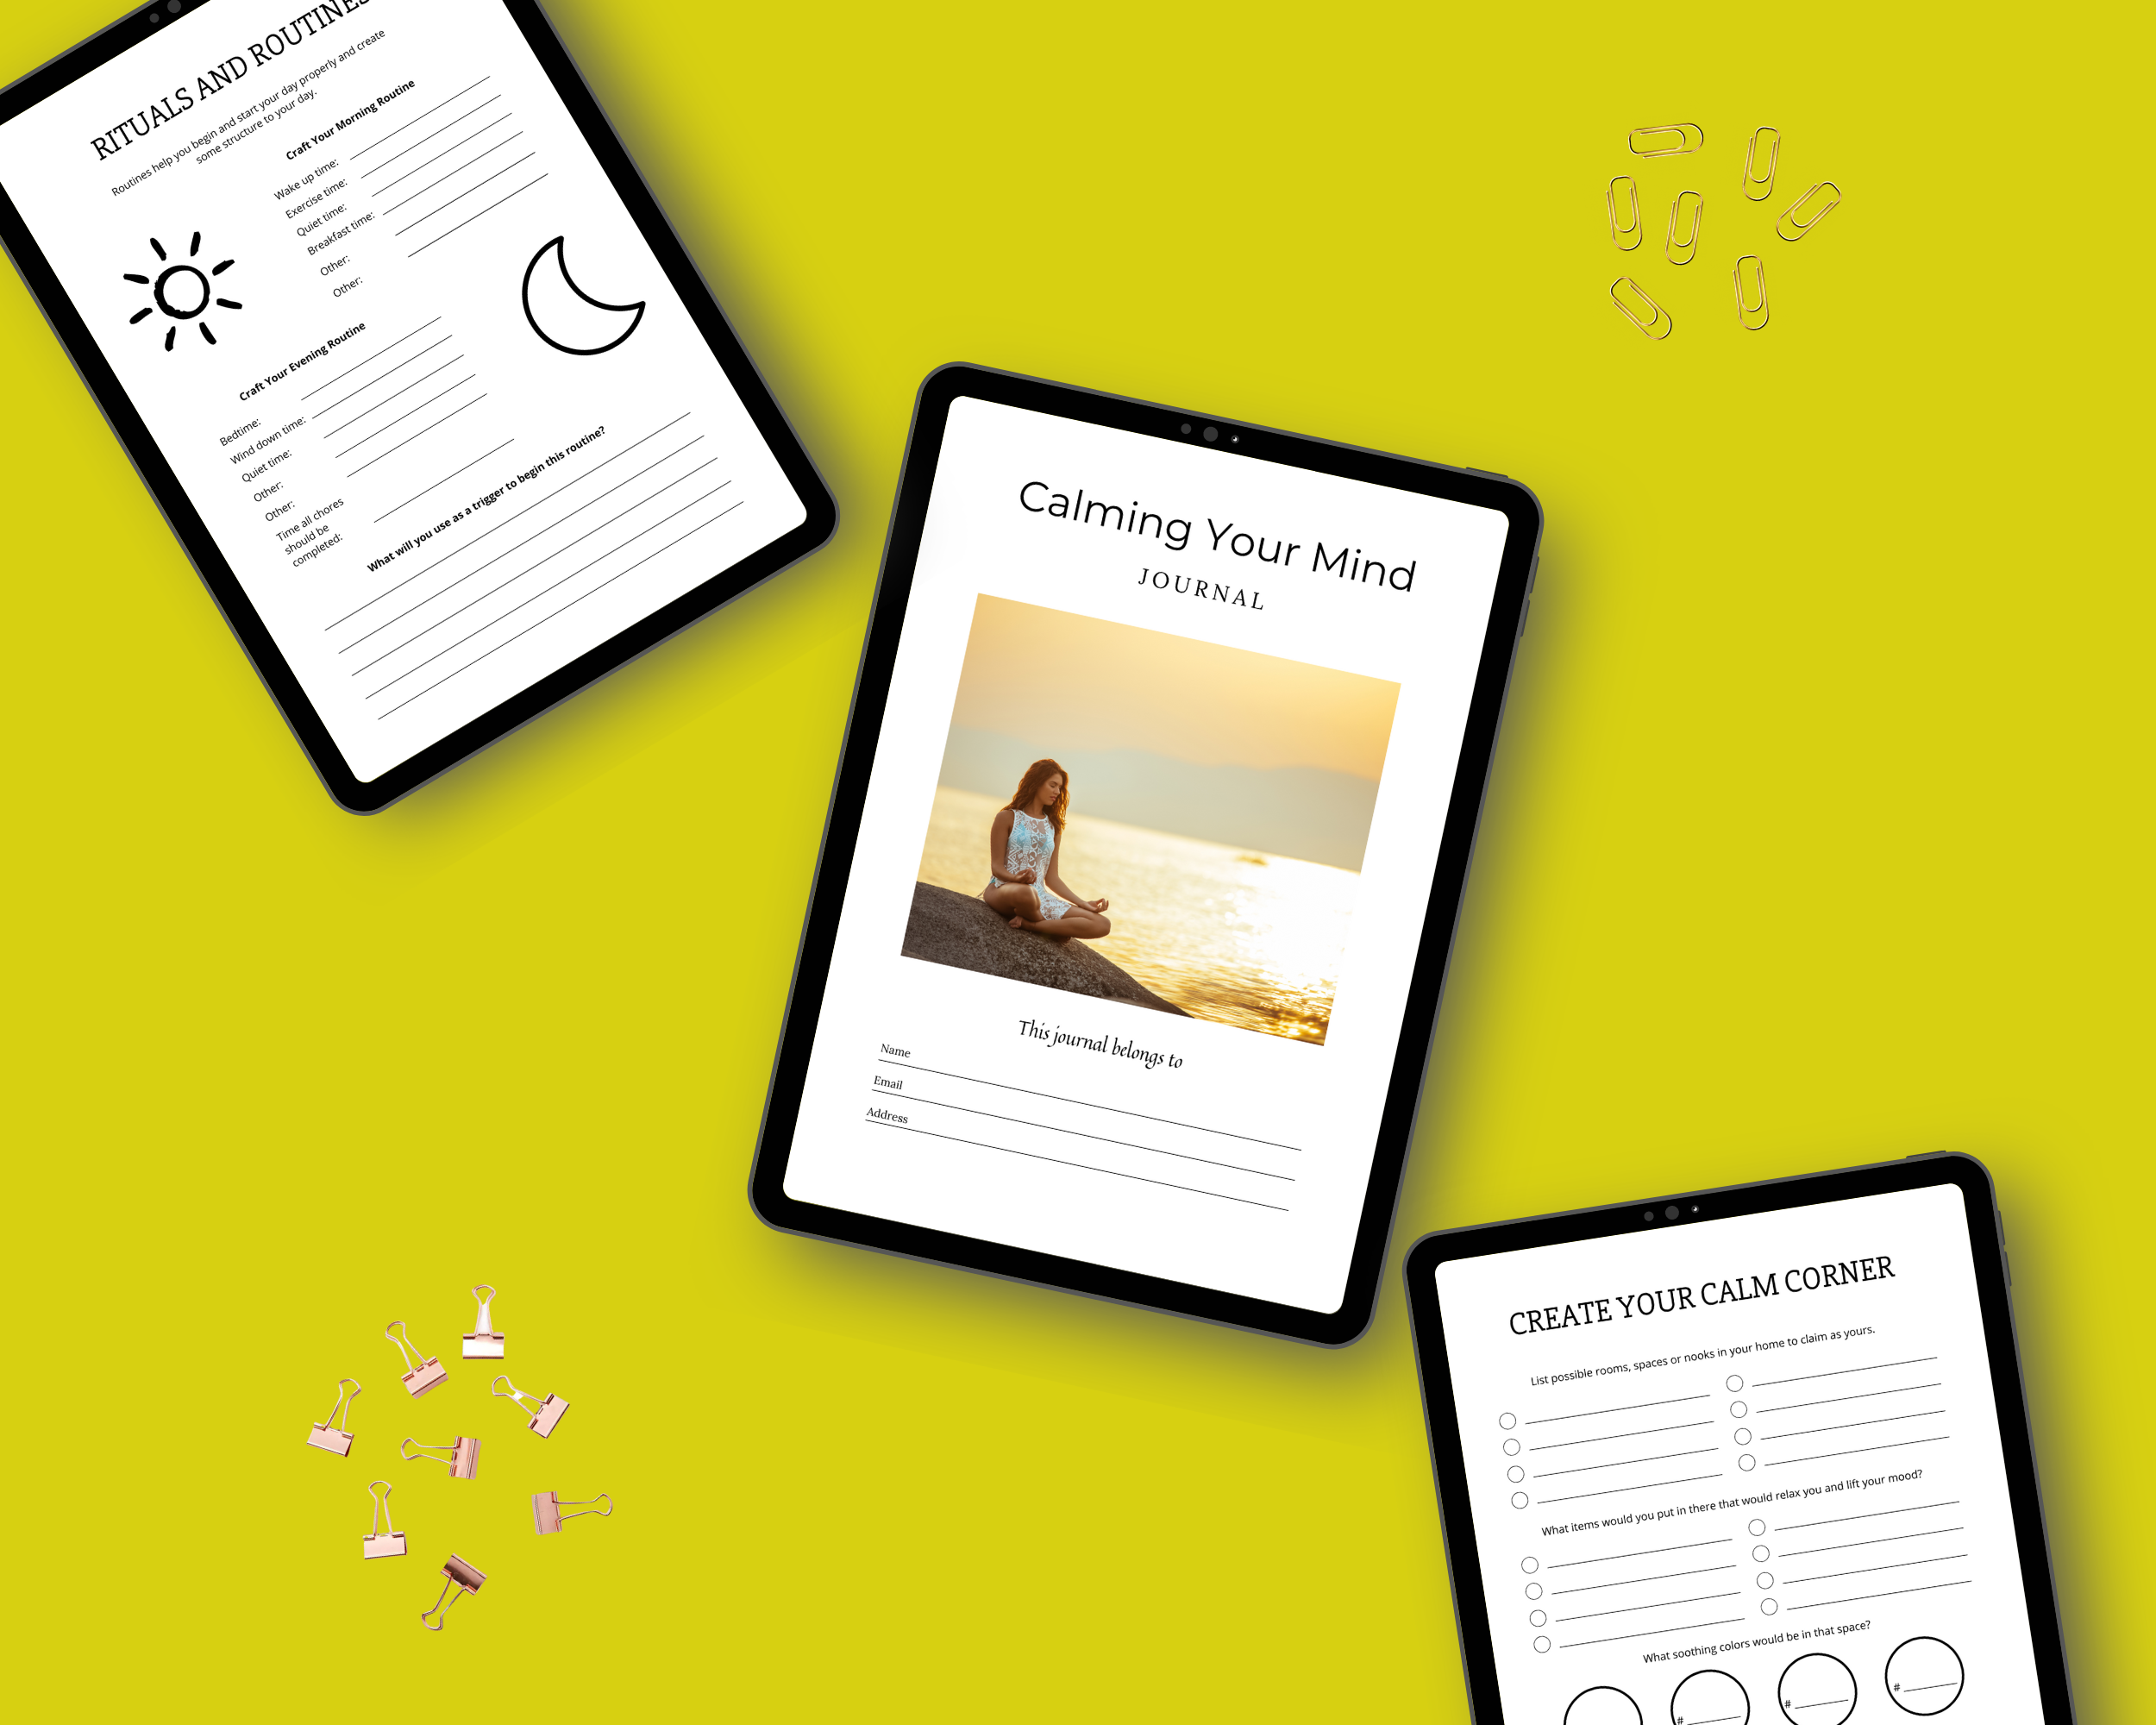 Editable Calming Your Mind Planner in Canva | Commercial Use